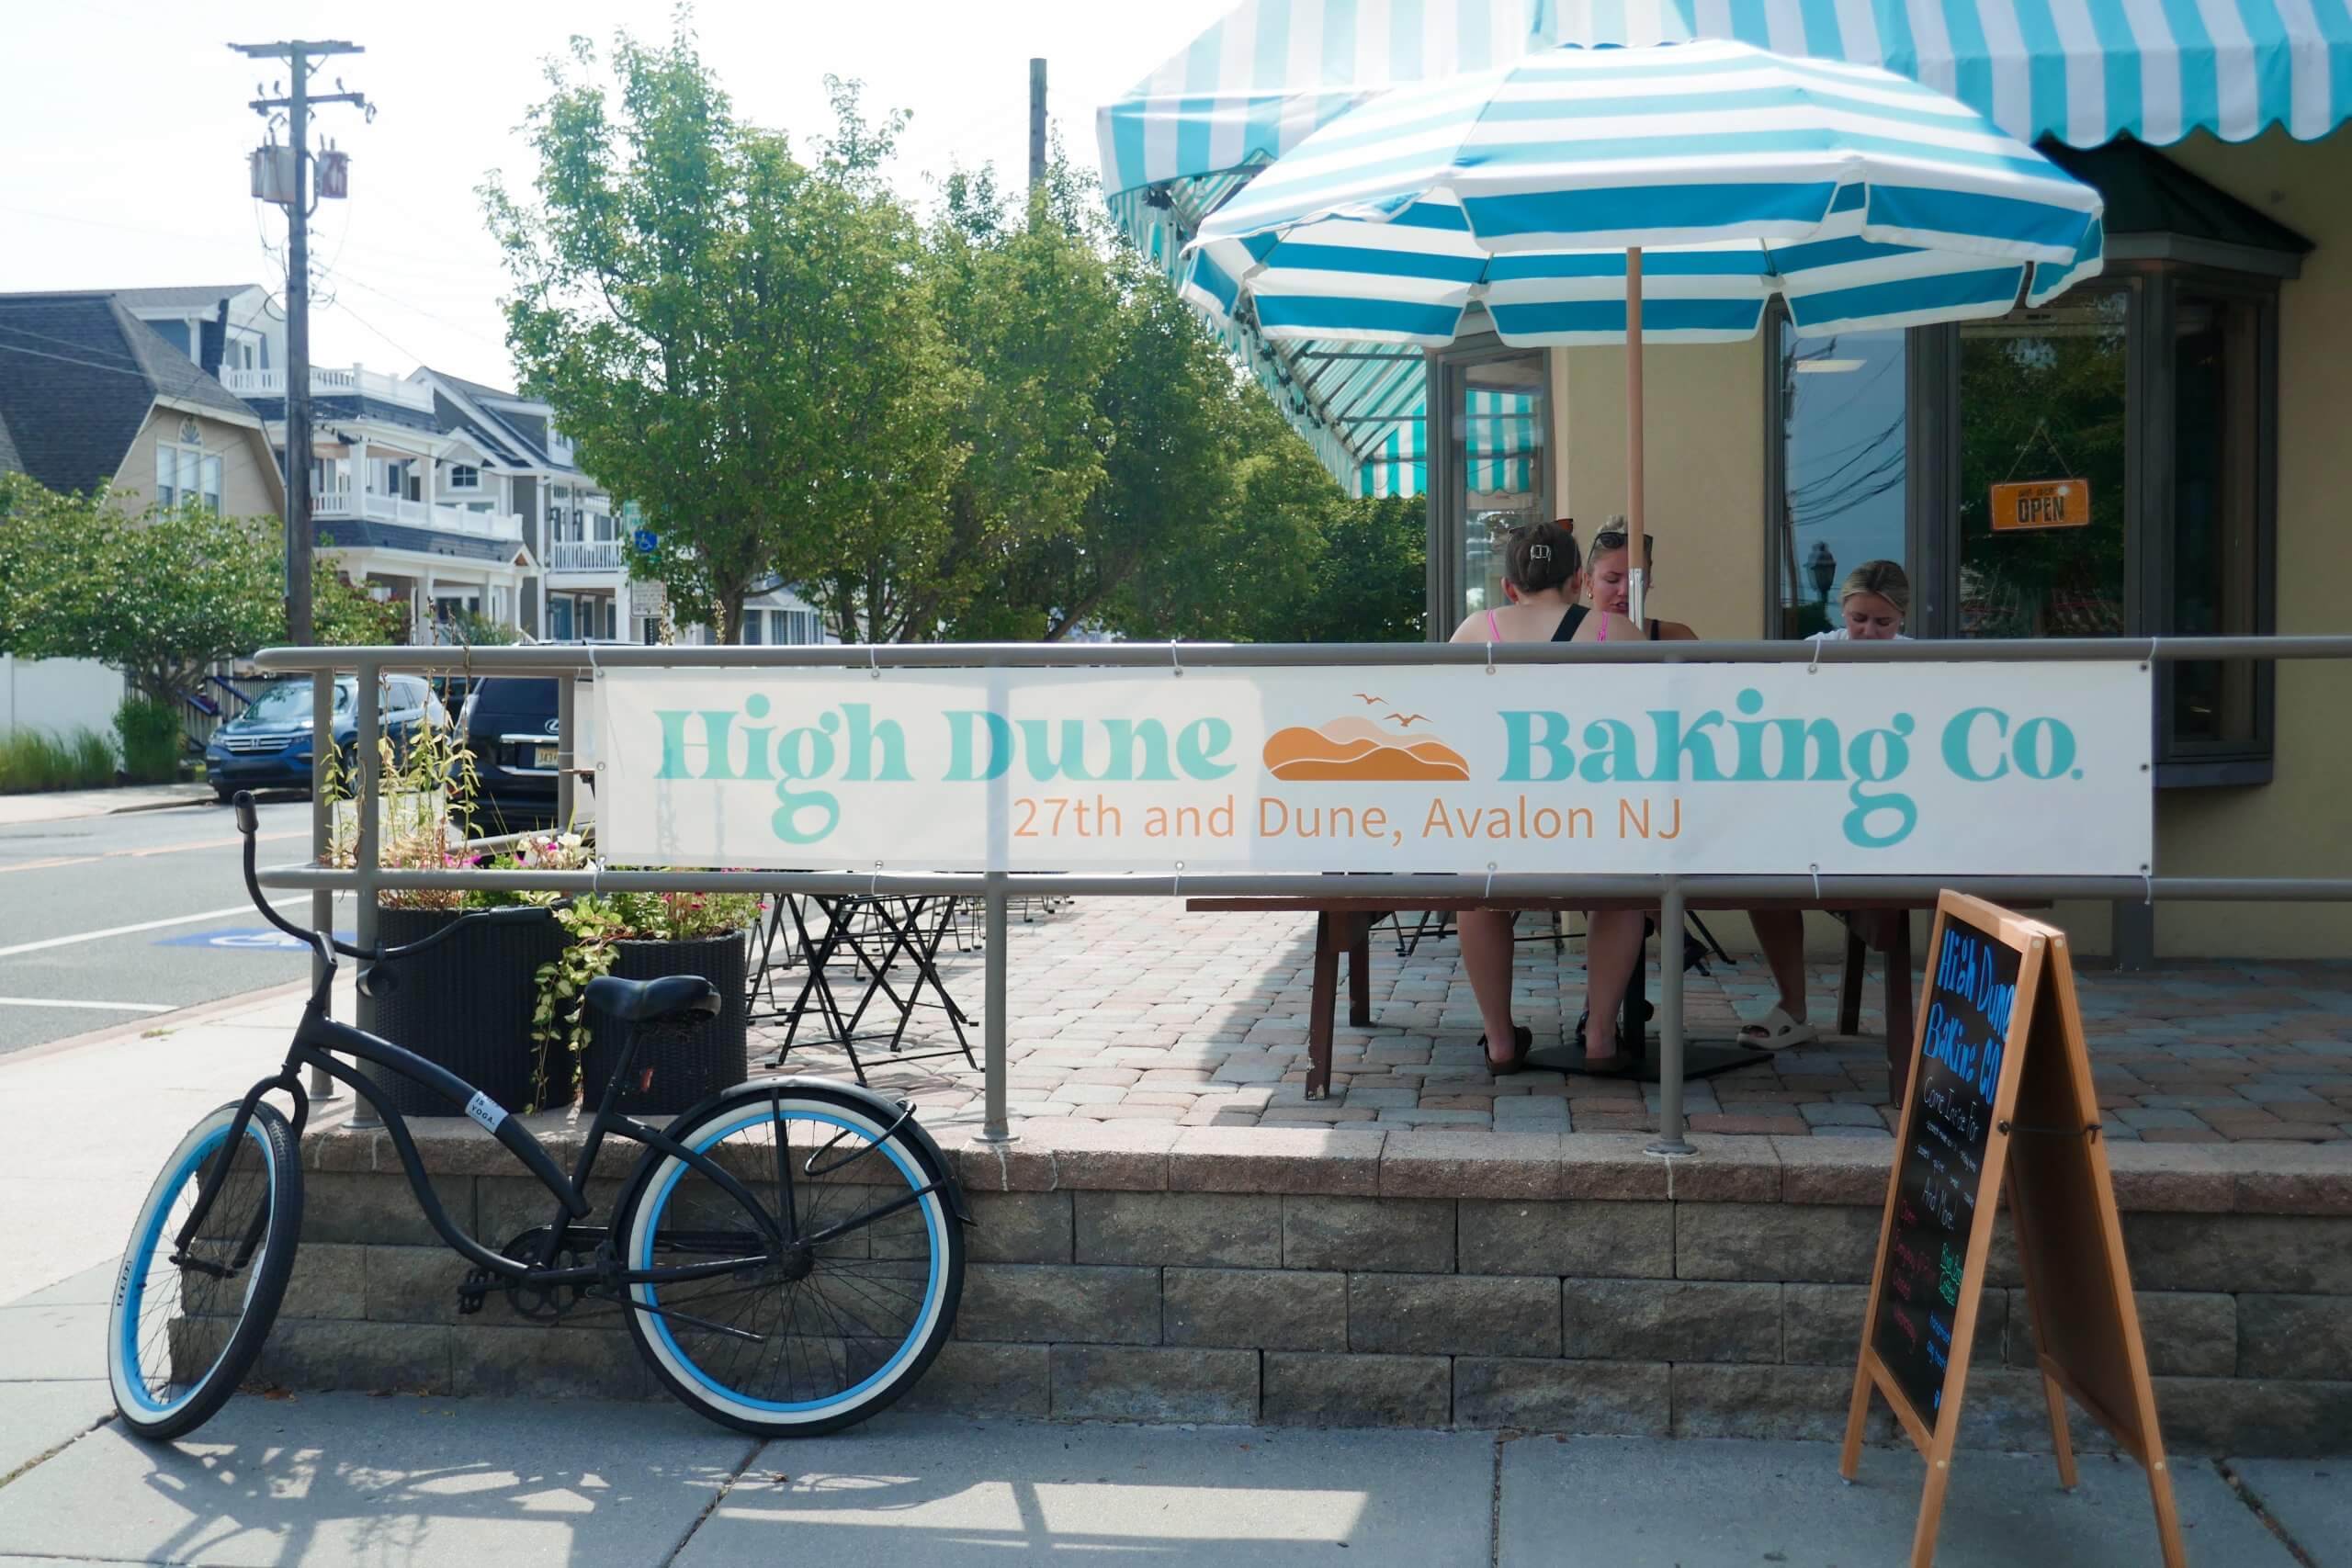 High Dune Baking Company Channels the Spirit of Old Avalon